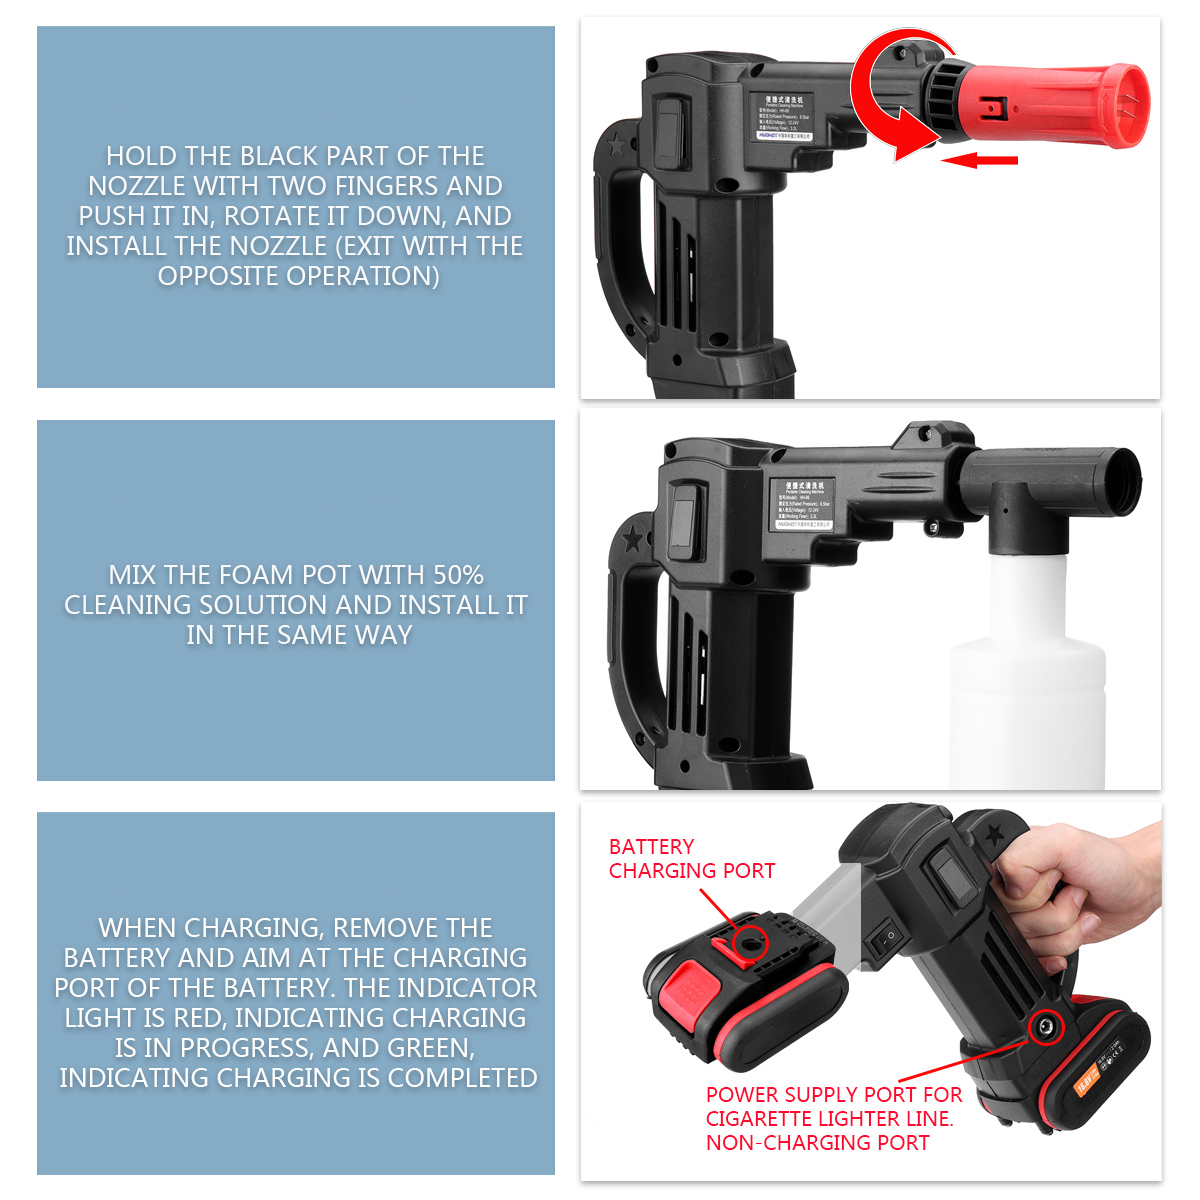 Rechargable-High-Pressure-Car-Washer-Cleaning-Wand-Nozzle-Spray-Guns-Flow-Controls-Tool-W-Filter-Wat-1837431-2